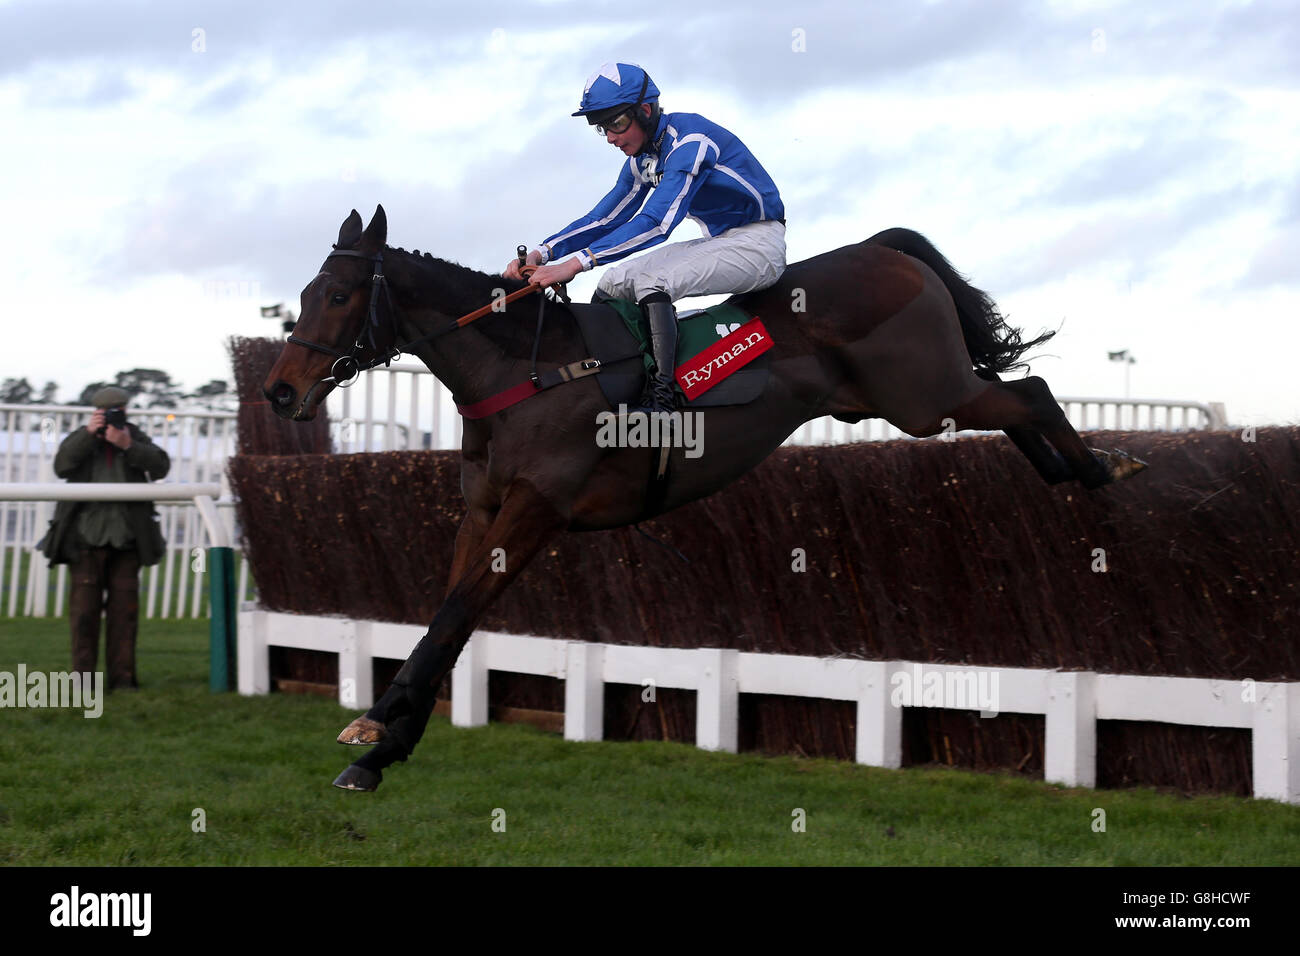 Cheltenham Races - The International - Day One. Aachen ridden by jockey Charlie Deutsch clear a fence during the Ryman Stationery Handicap Chase Stock Photo